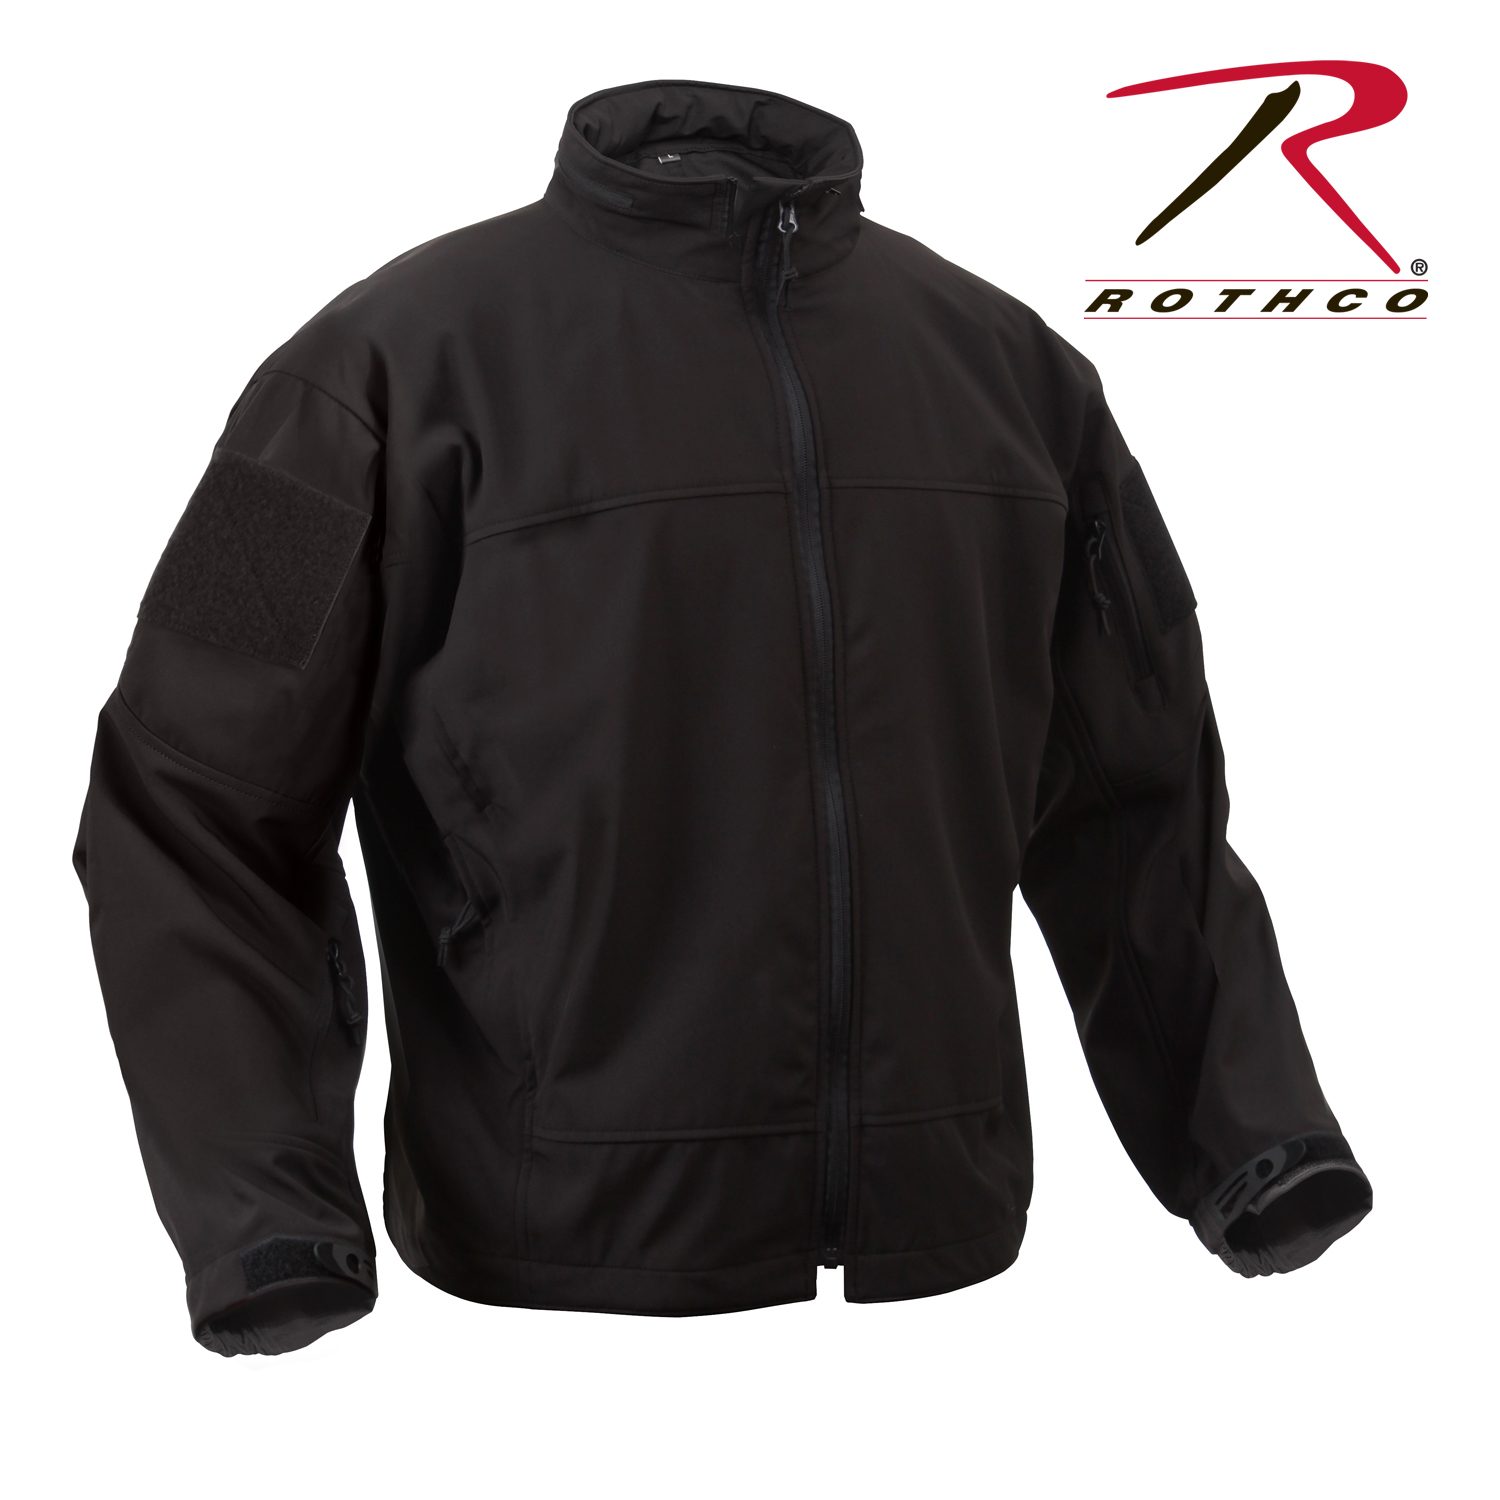 Rothco Covert Ops Light Weight Soft Shell Jacket